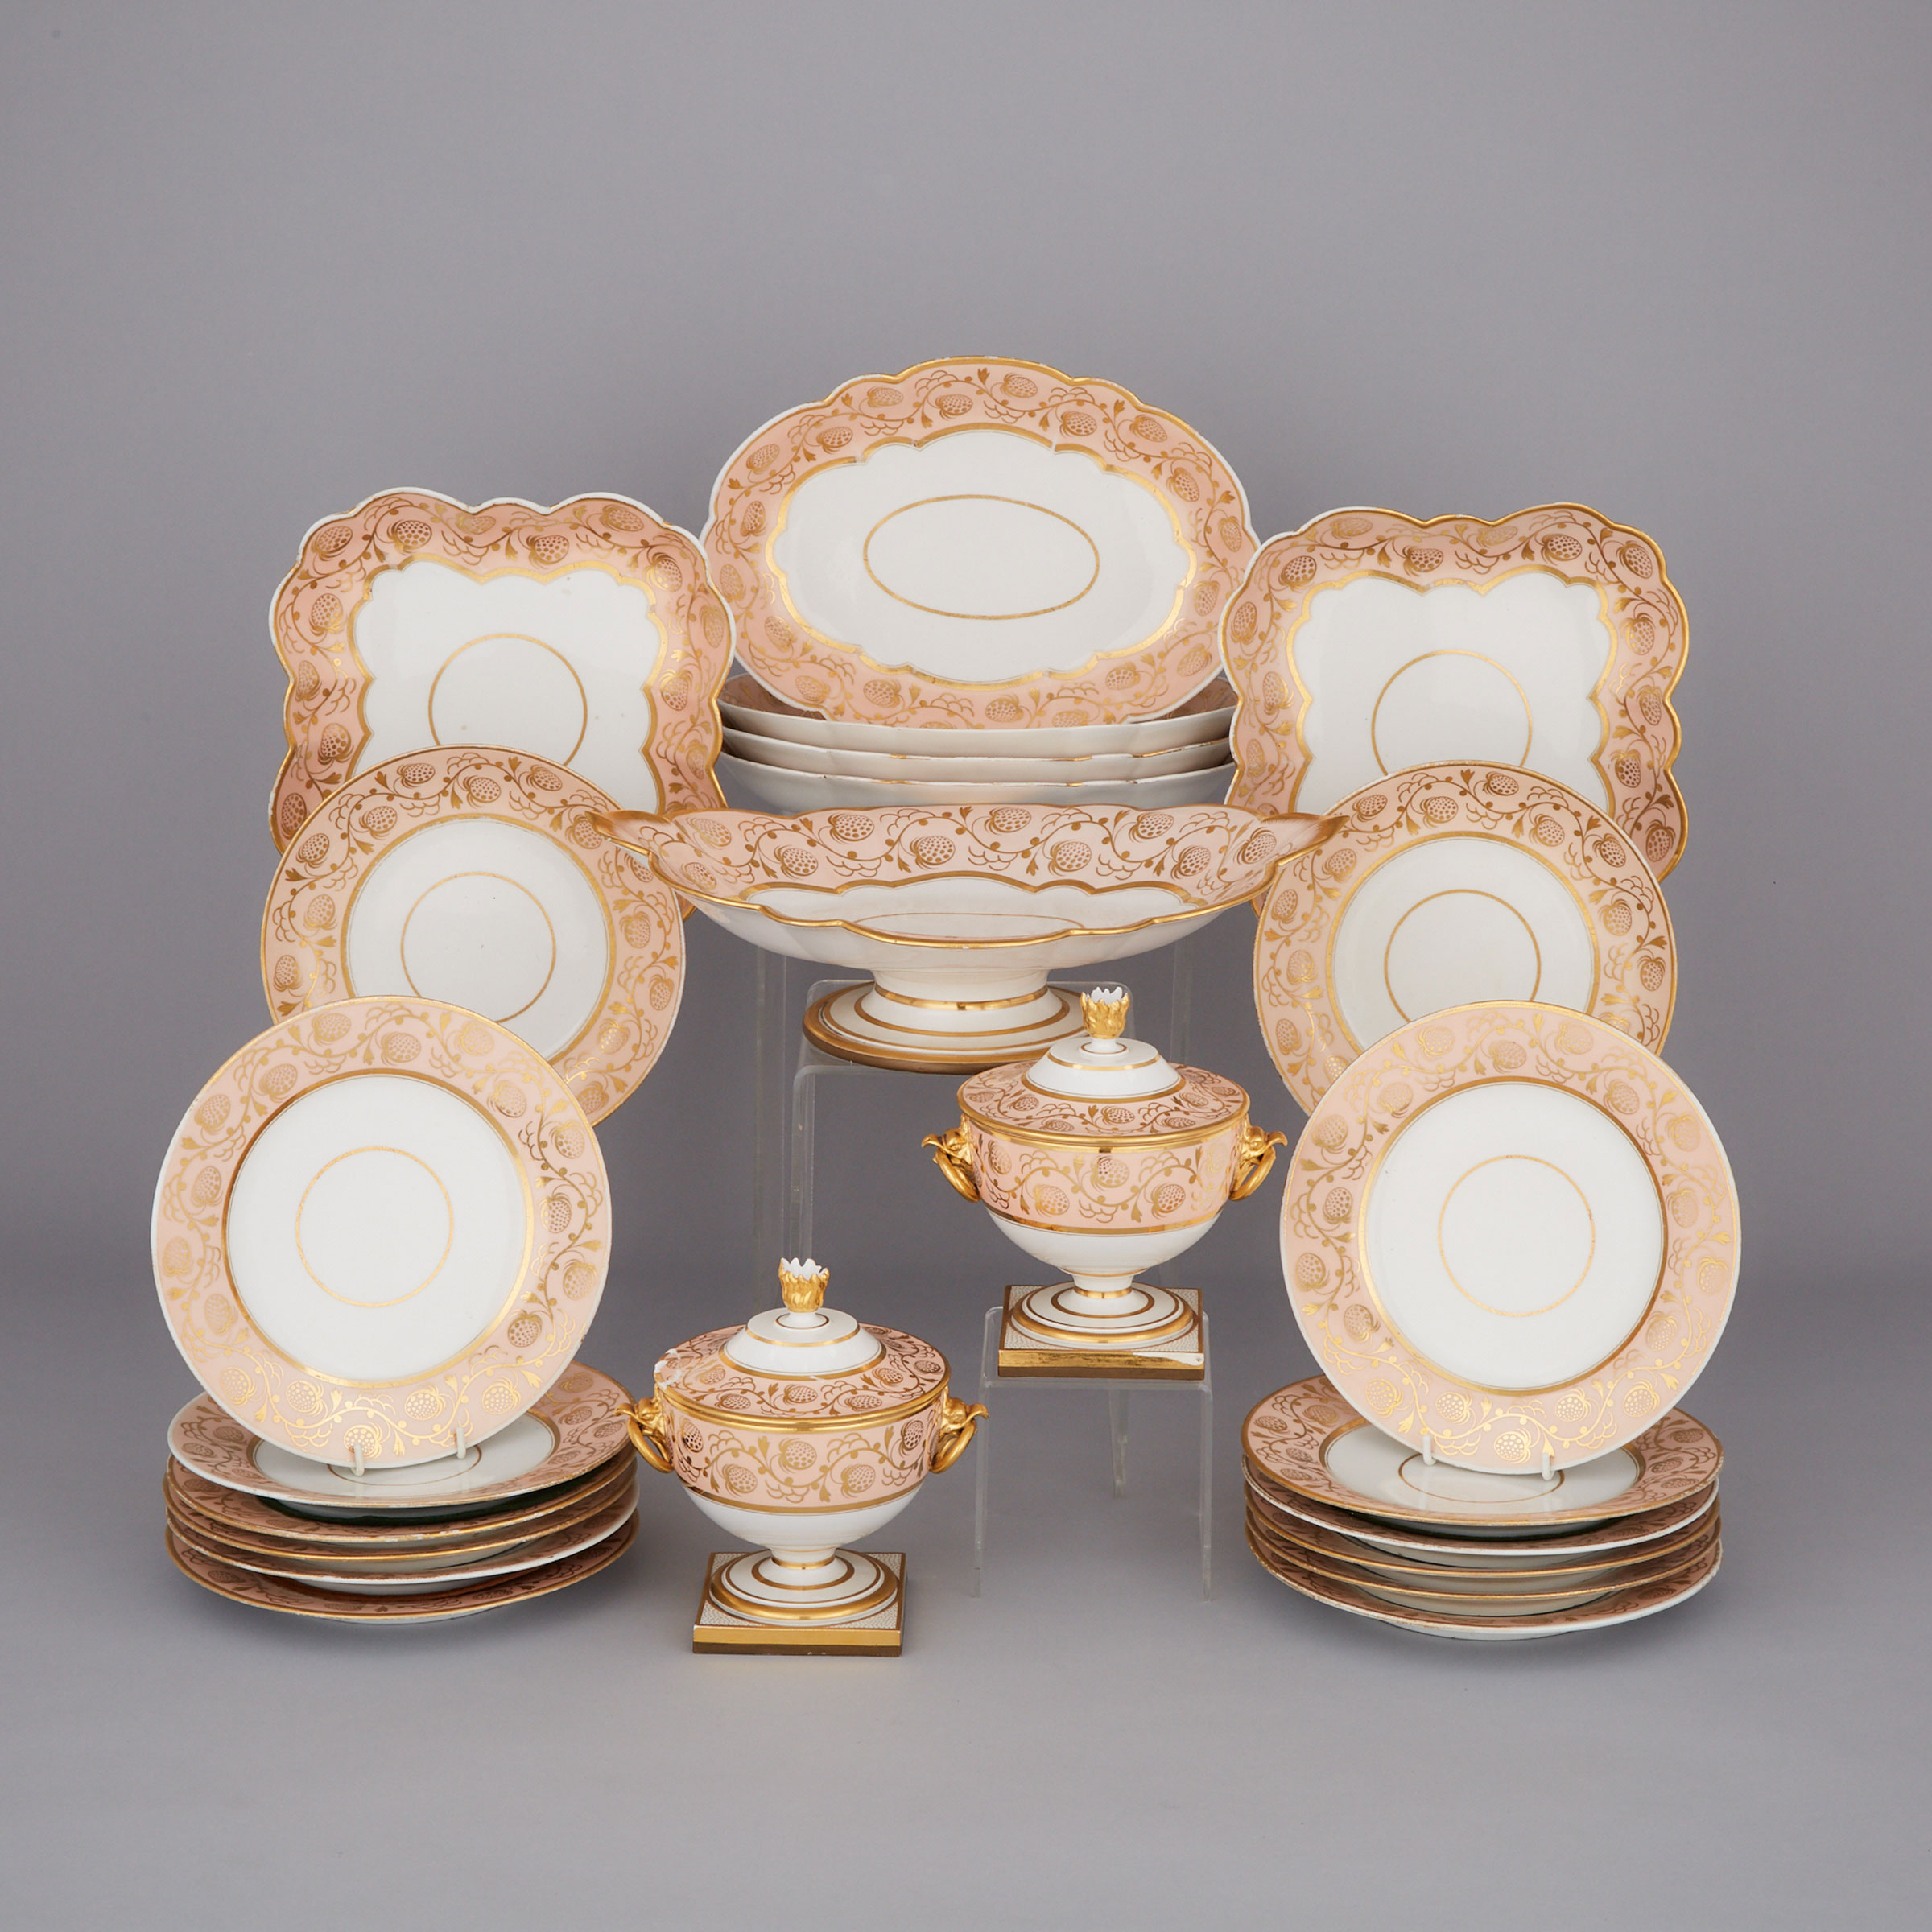 Flight, Barr & Barr Worcester Apricot and Gilt Banded Part Service, c.1820